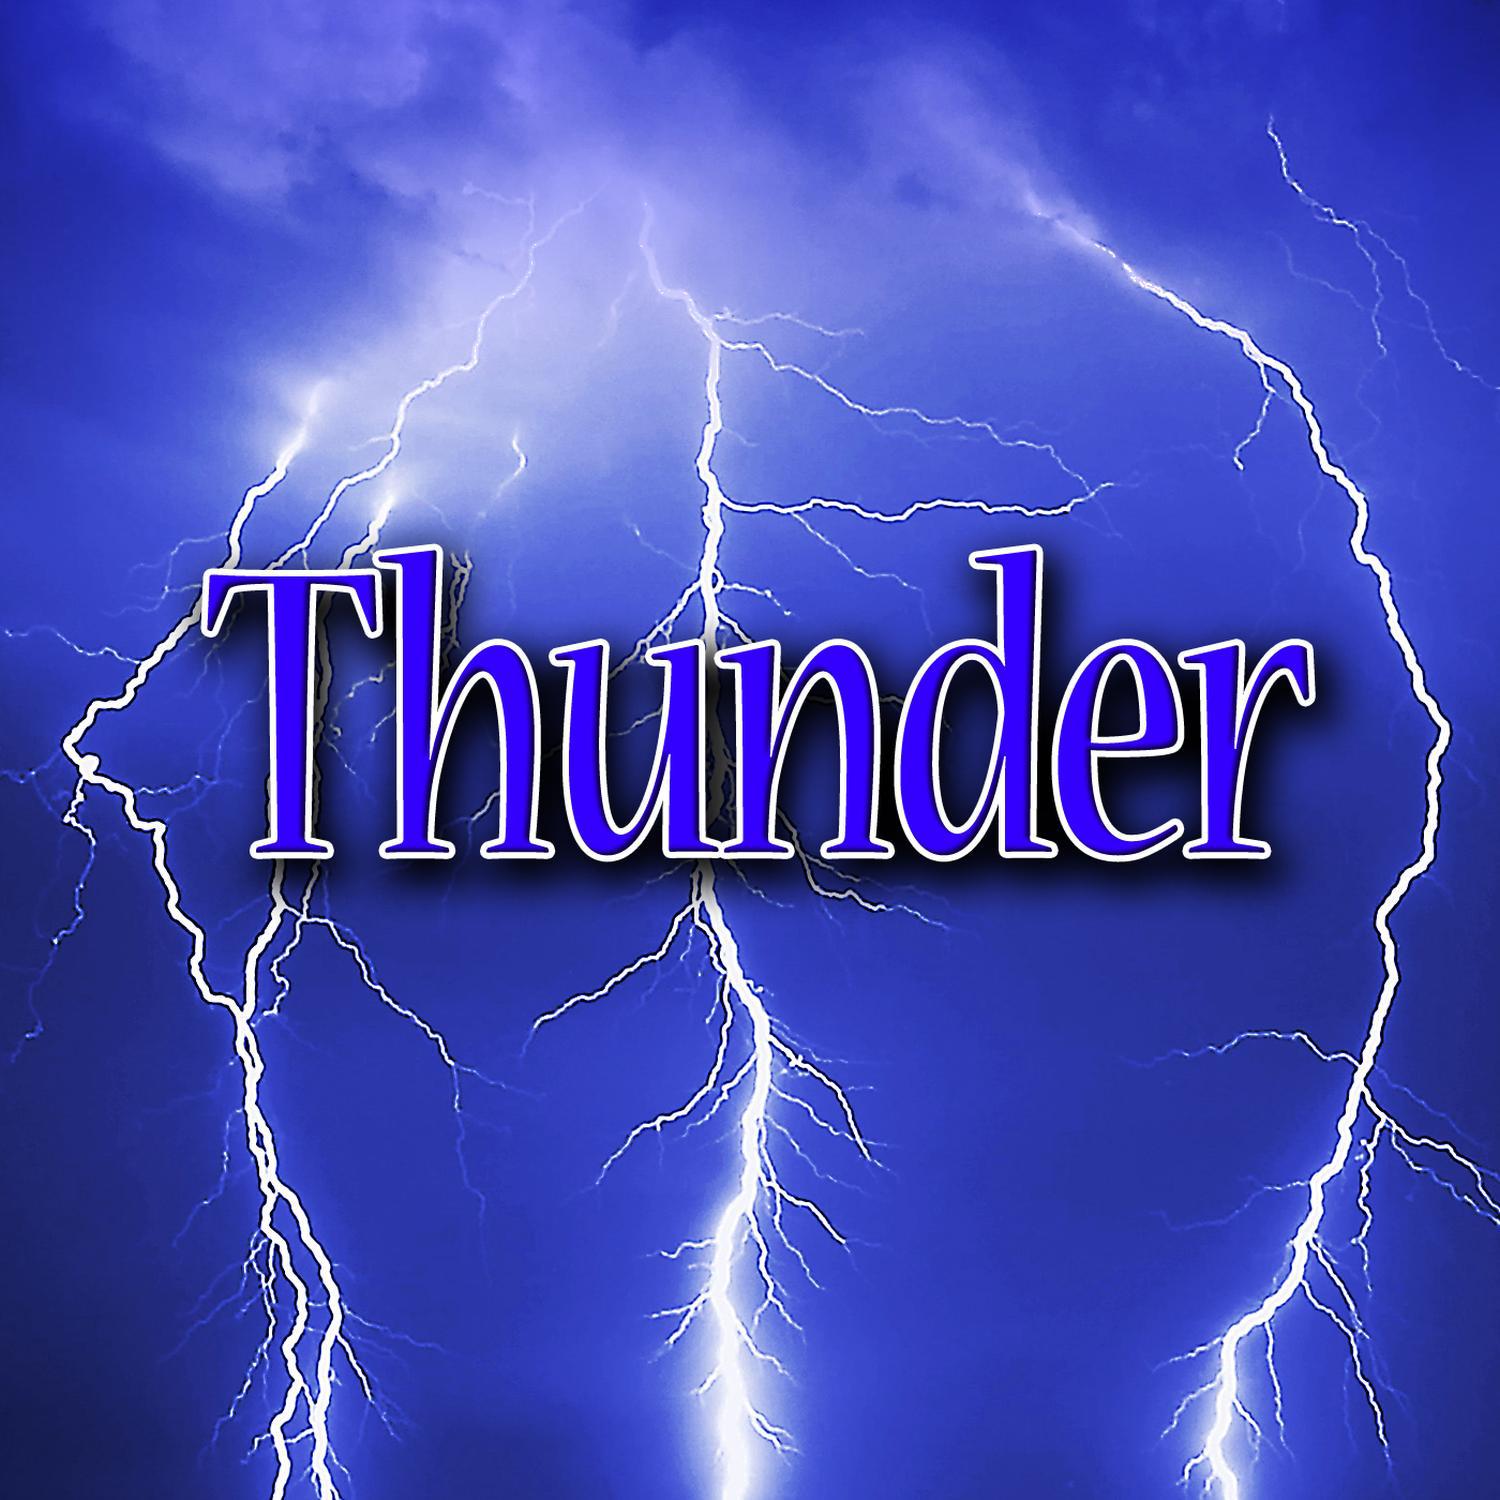 Deeper Relaxation: Steady Rain with Booming Thunder